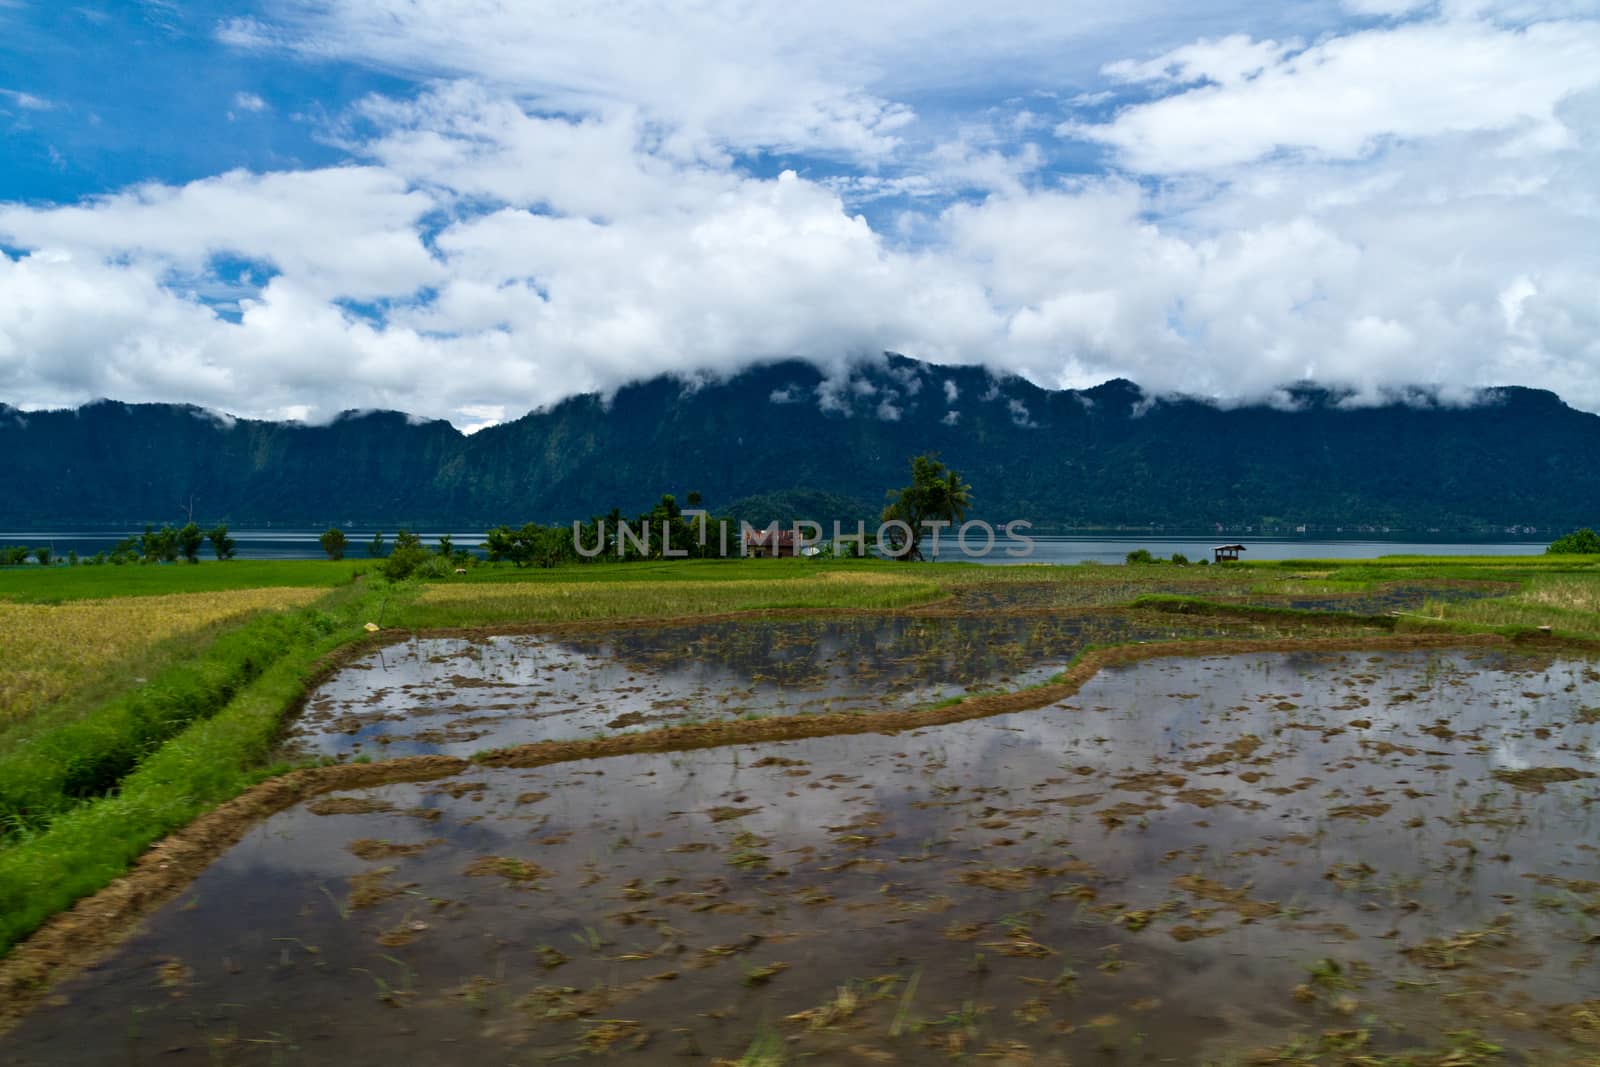 Paddyfield By the Lake by azamshah72